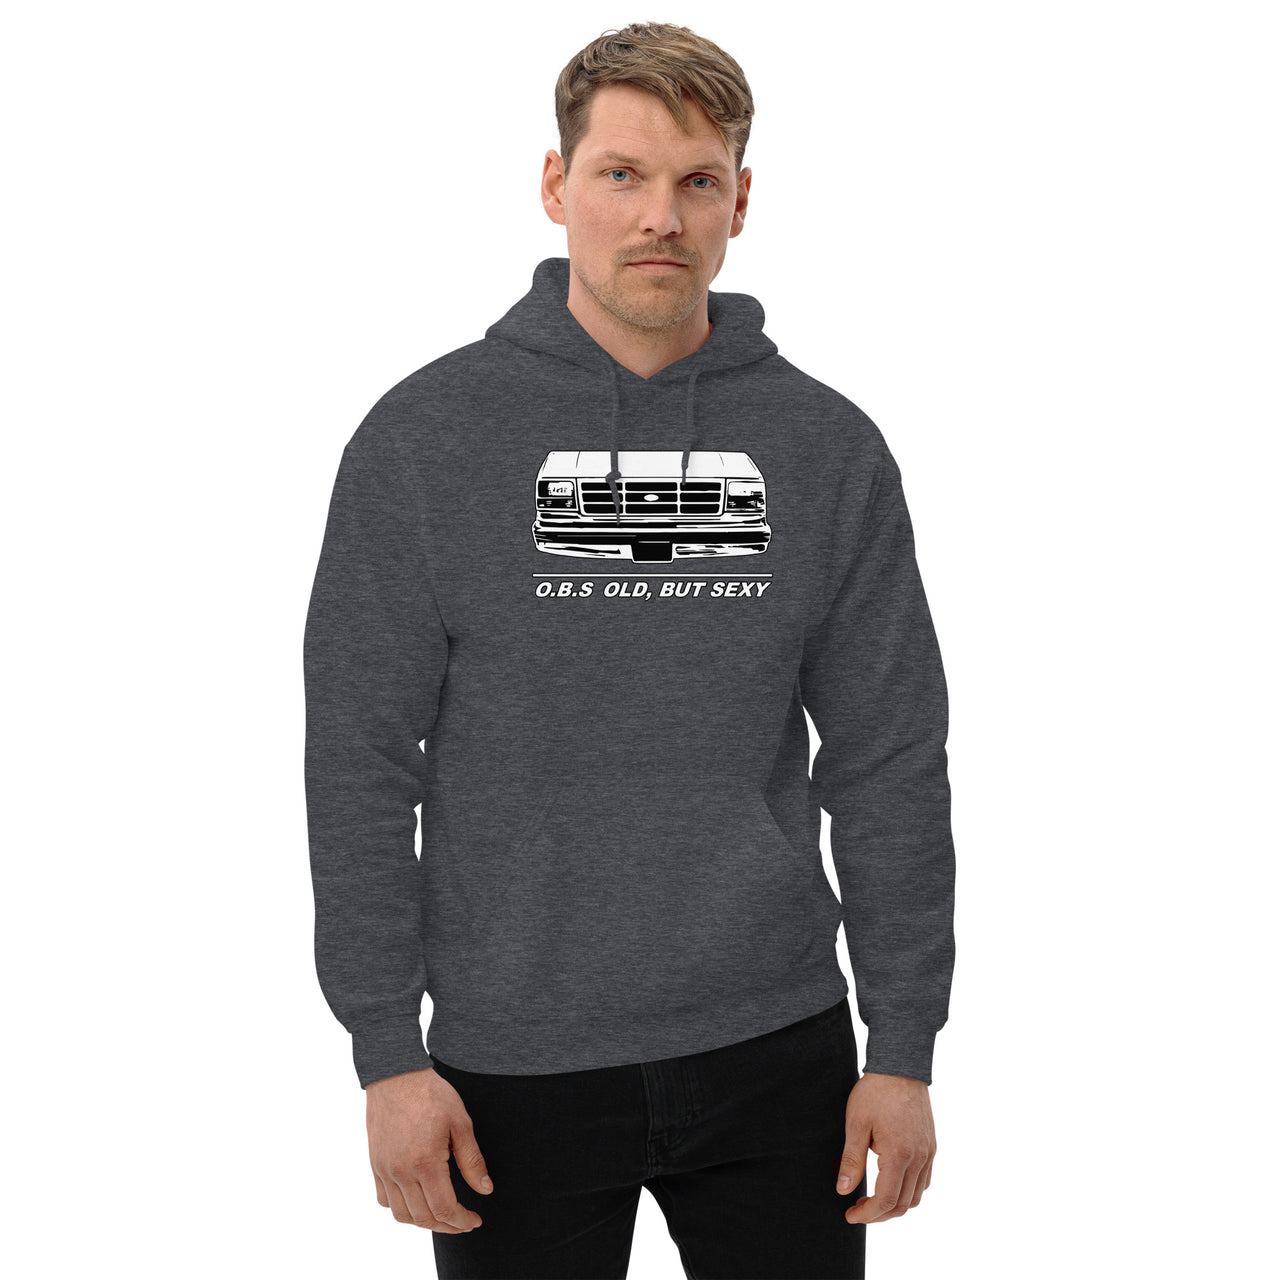 OBS Truck - Old, But Sexy Hoodie modeled in grey